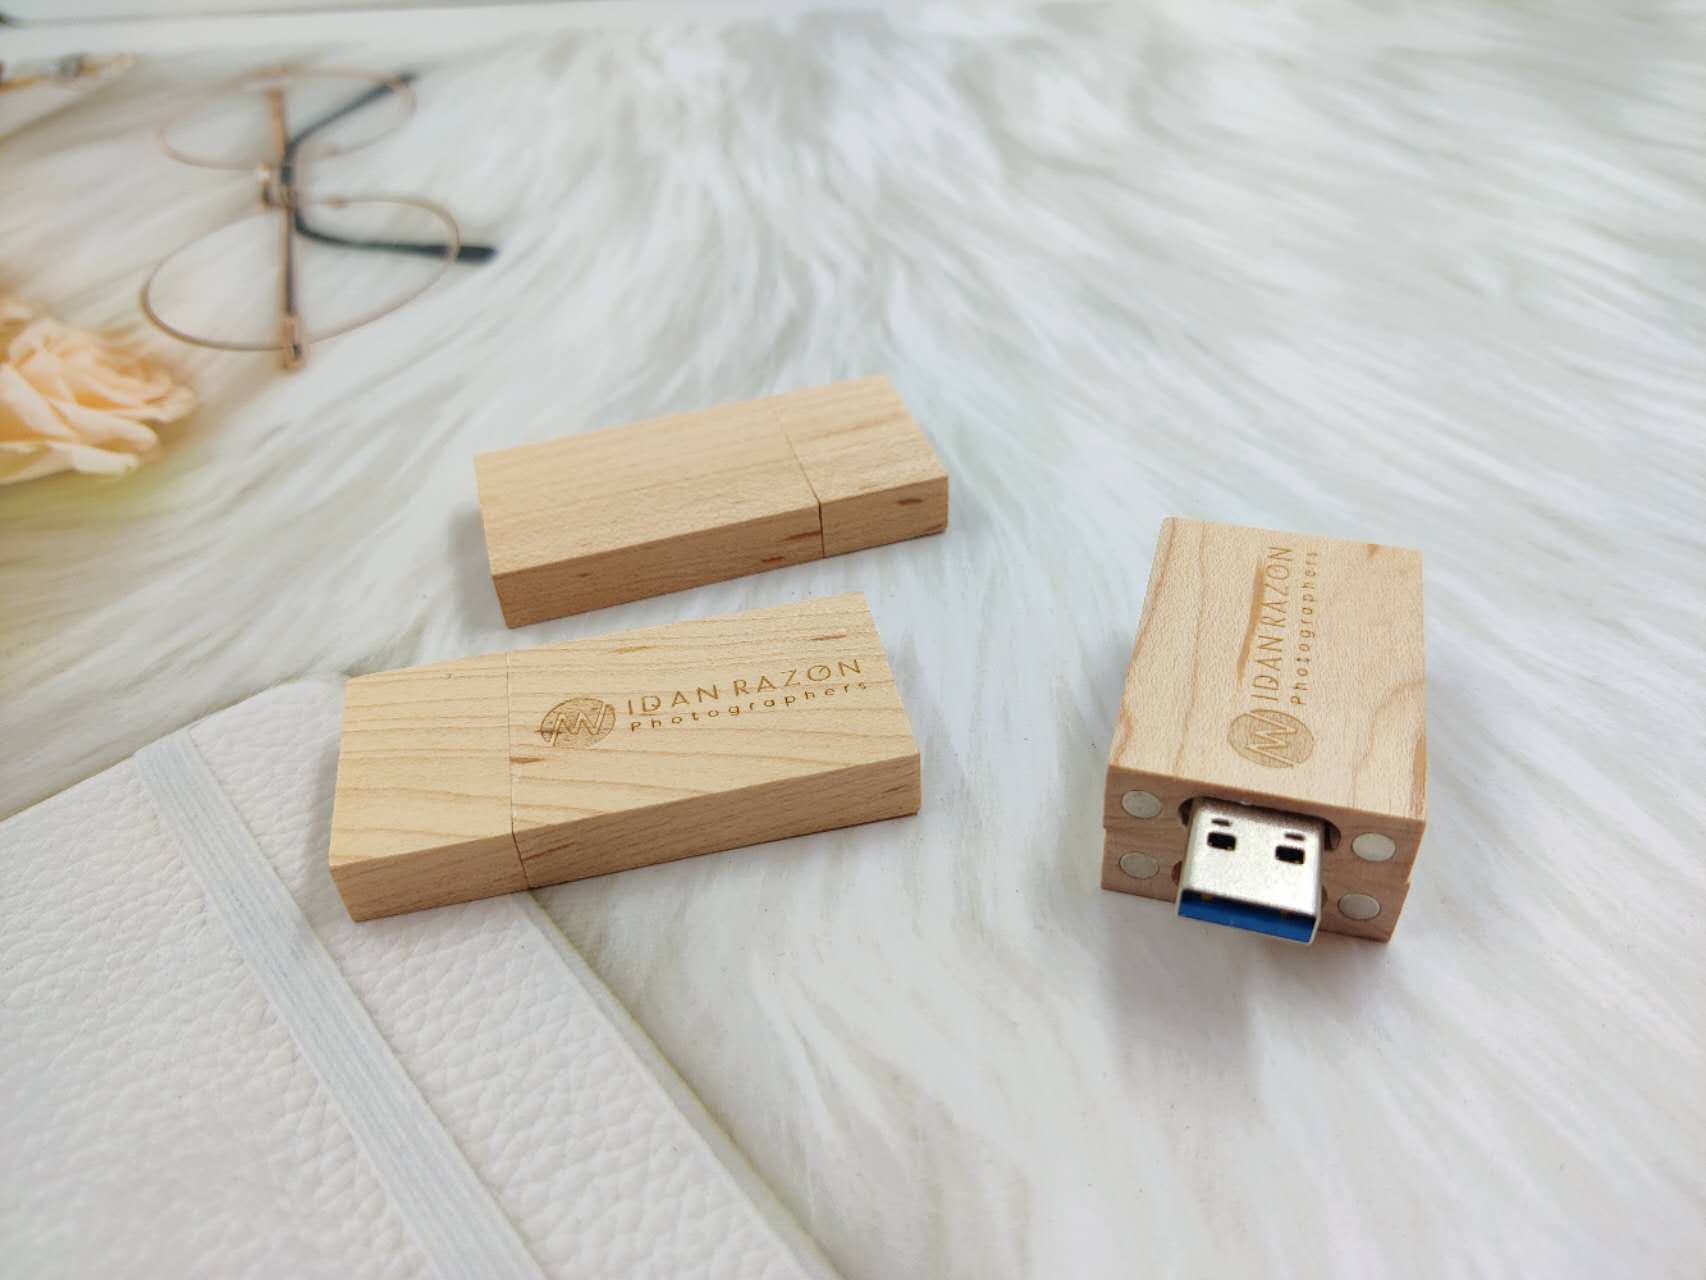 Classic vintage wooden style USB drives order again in August, do you have any order purchase plan ?